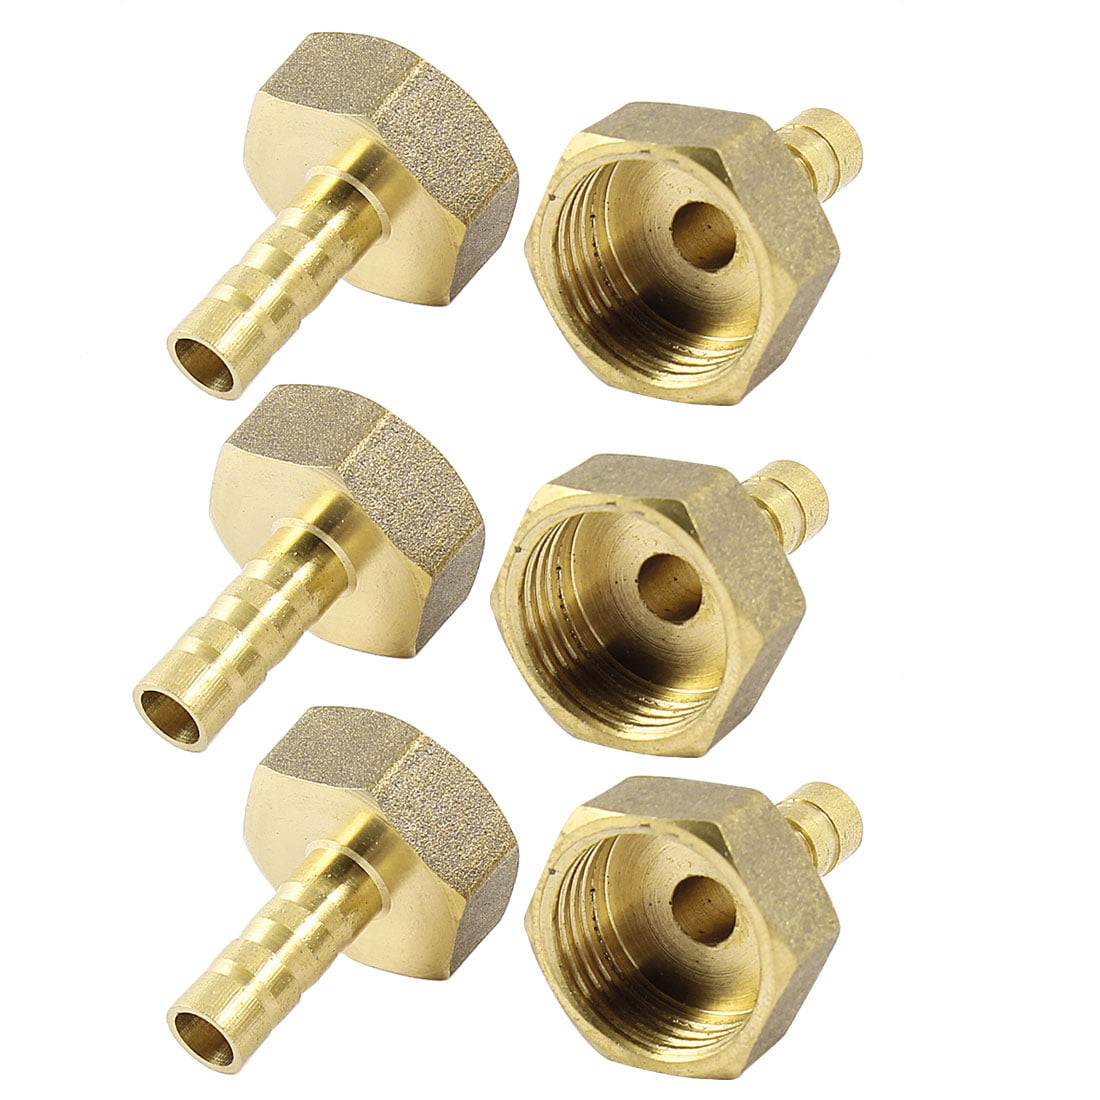 Brass Barbed 8mm x NPT 1/2'' Female Thread Pipe Fittings Coupler Connector 